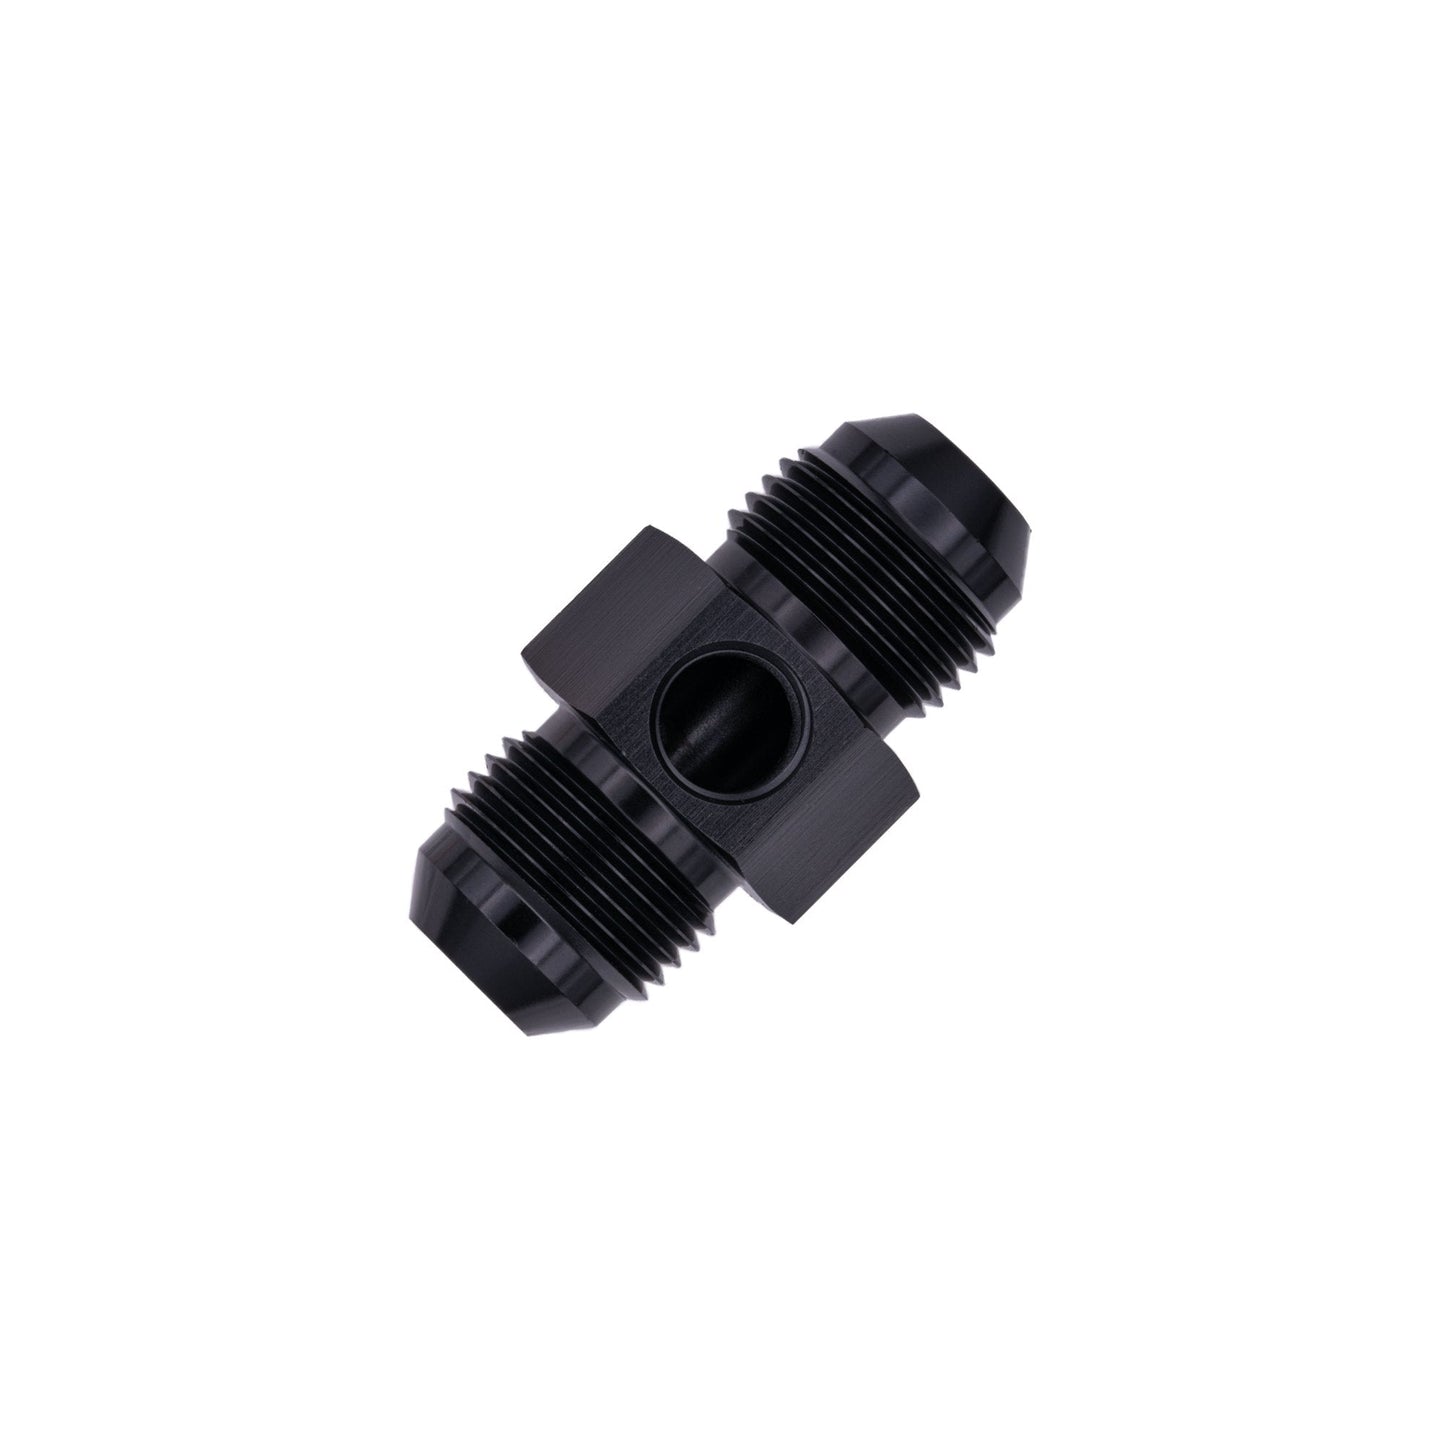 Male Union Adapter with 1/8"NPT Port